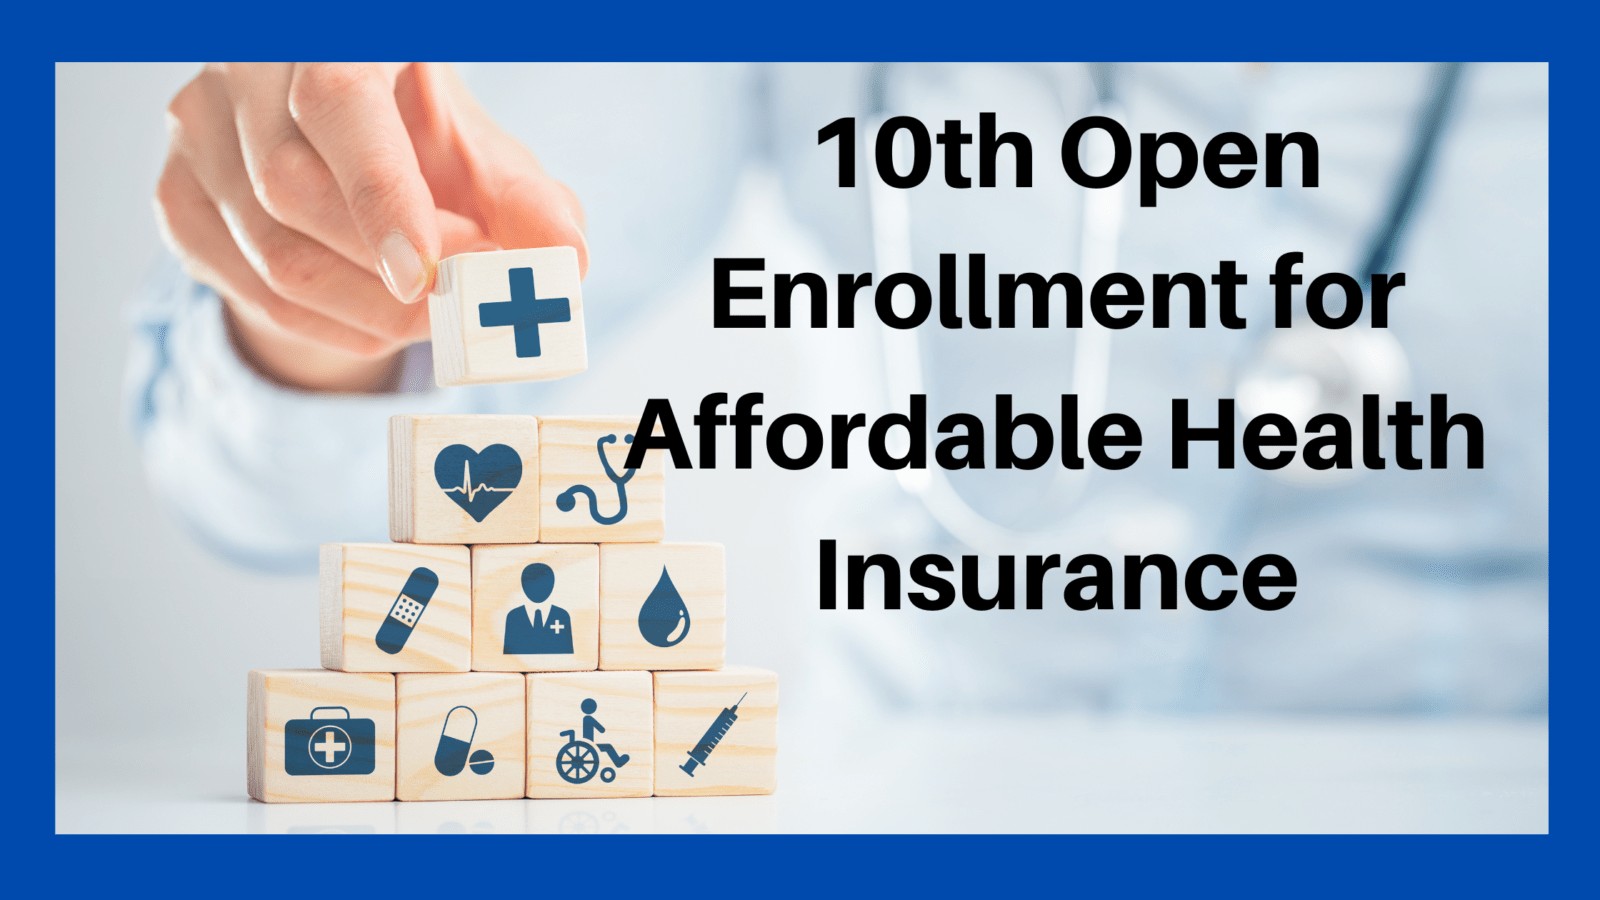 Biden-Harris Administration Launches 10th Year of Marketplace Open Enrollment in affordable health insurance